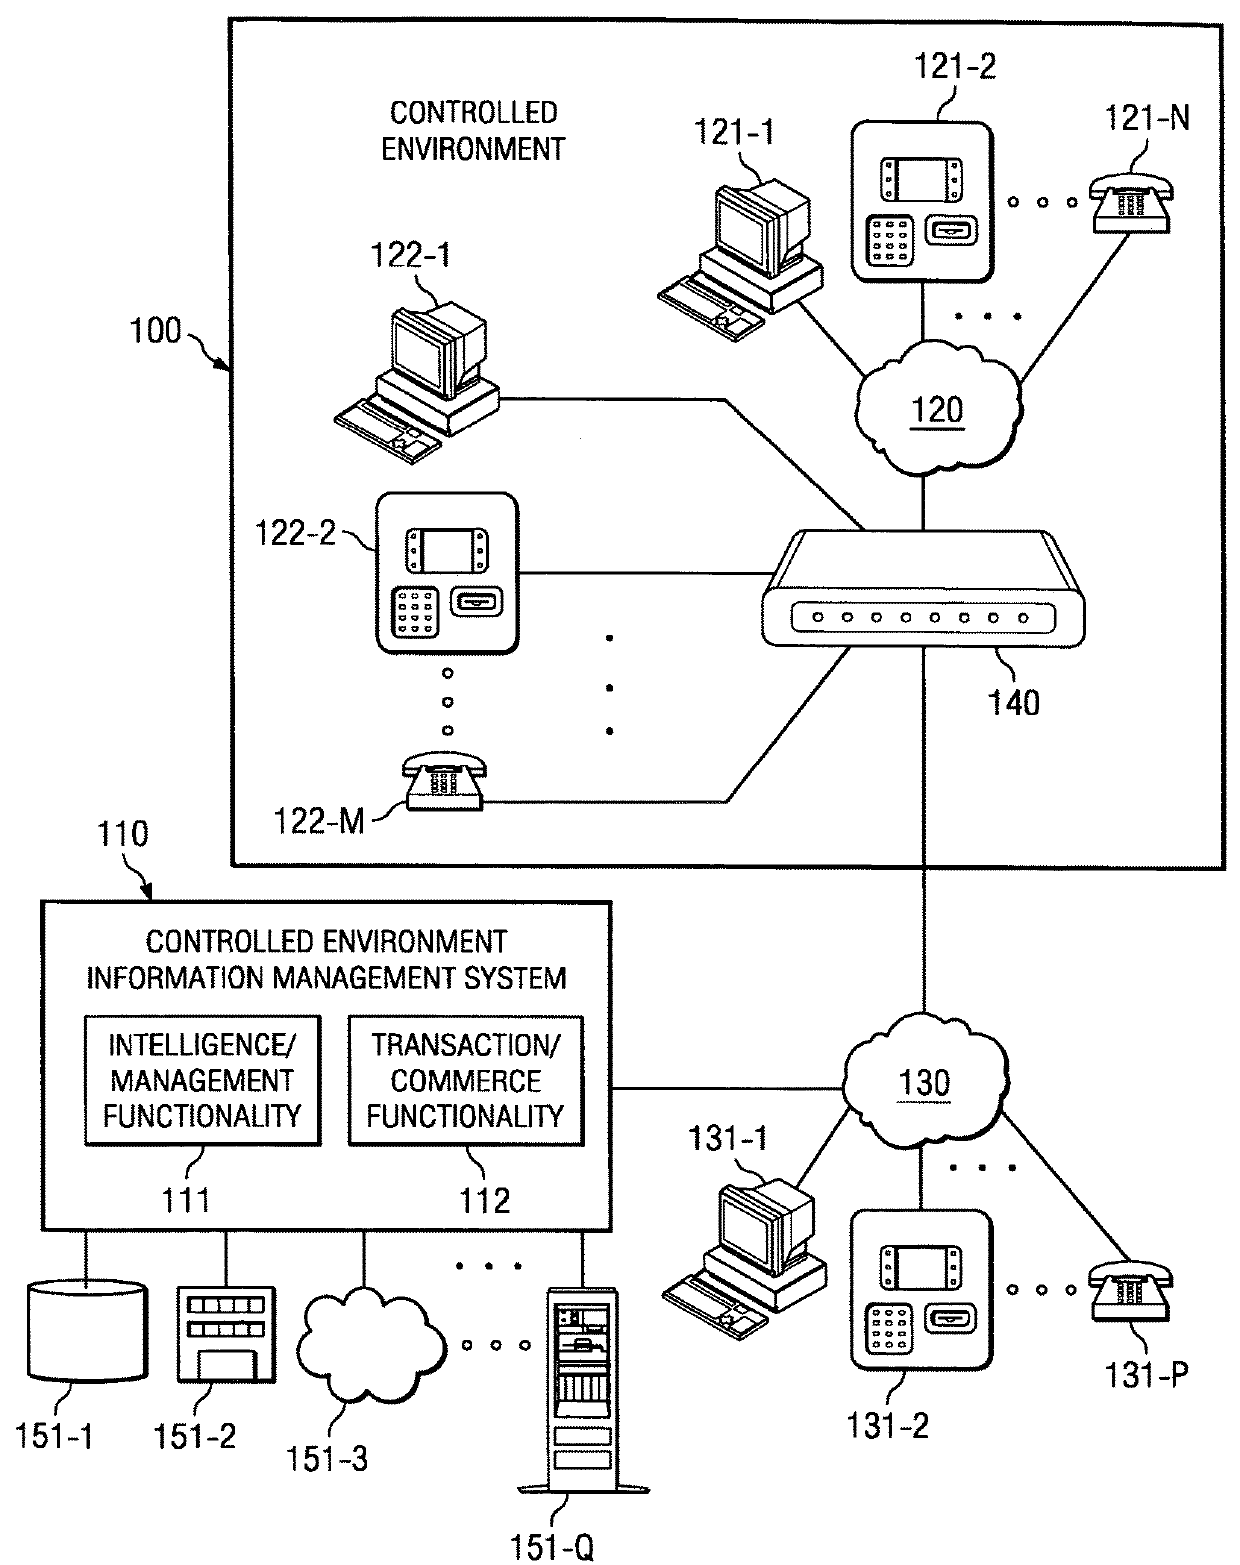 Processor-based self-service terminals used with respect to controlled environment facilities